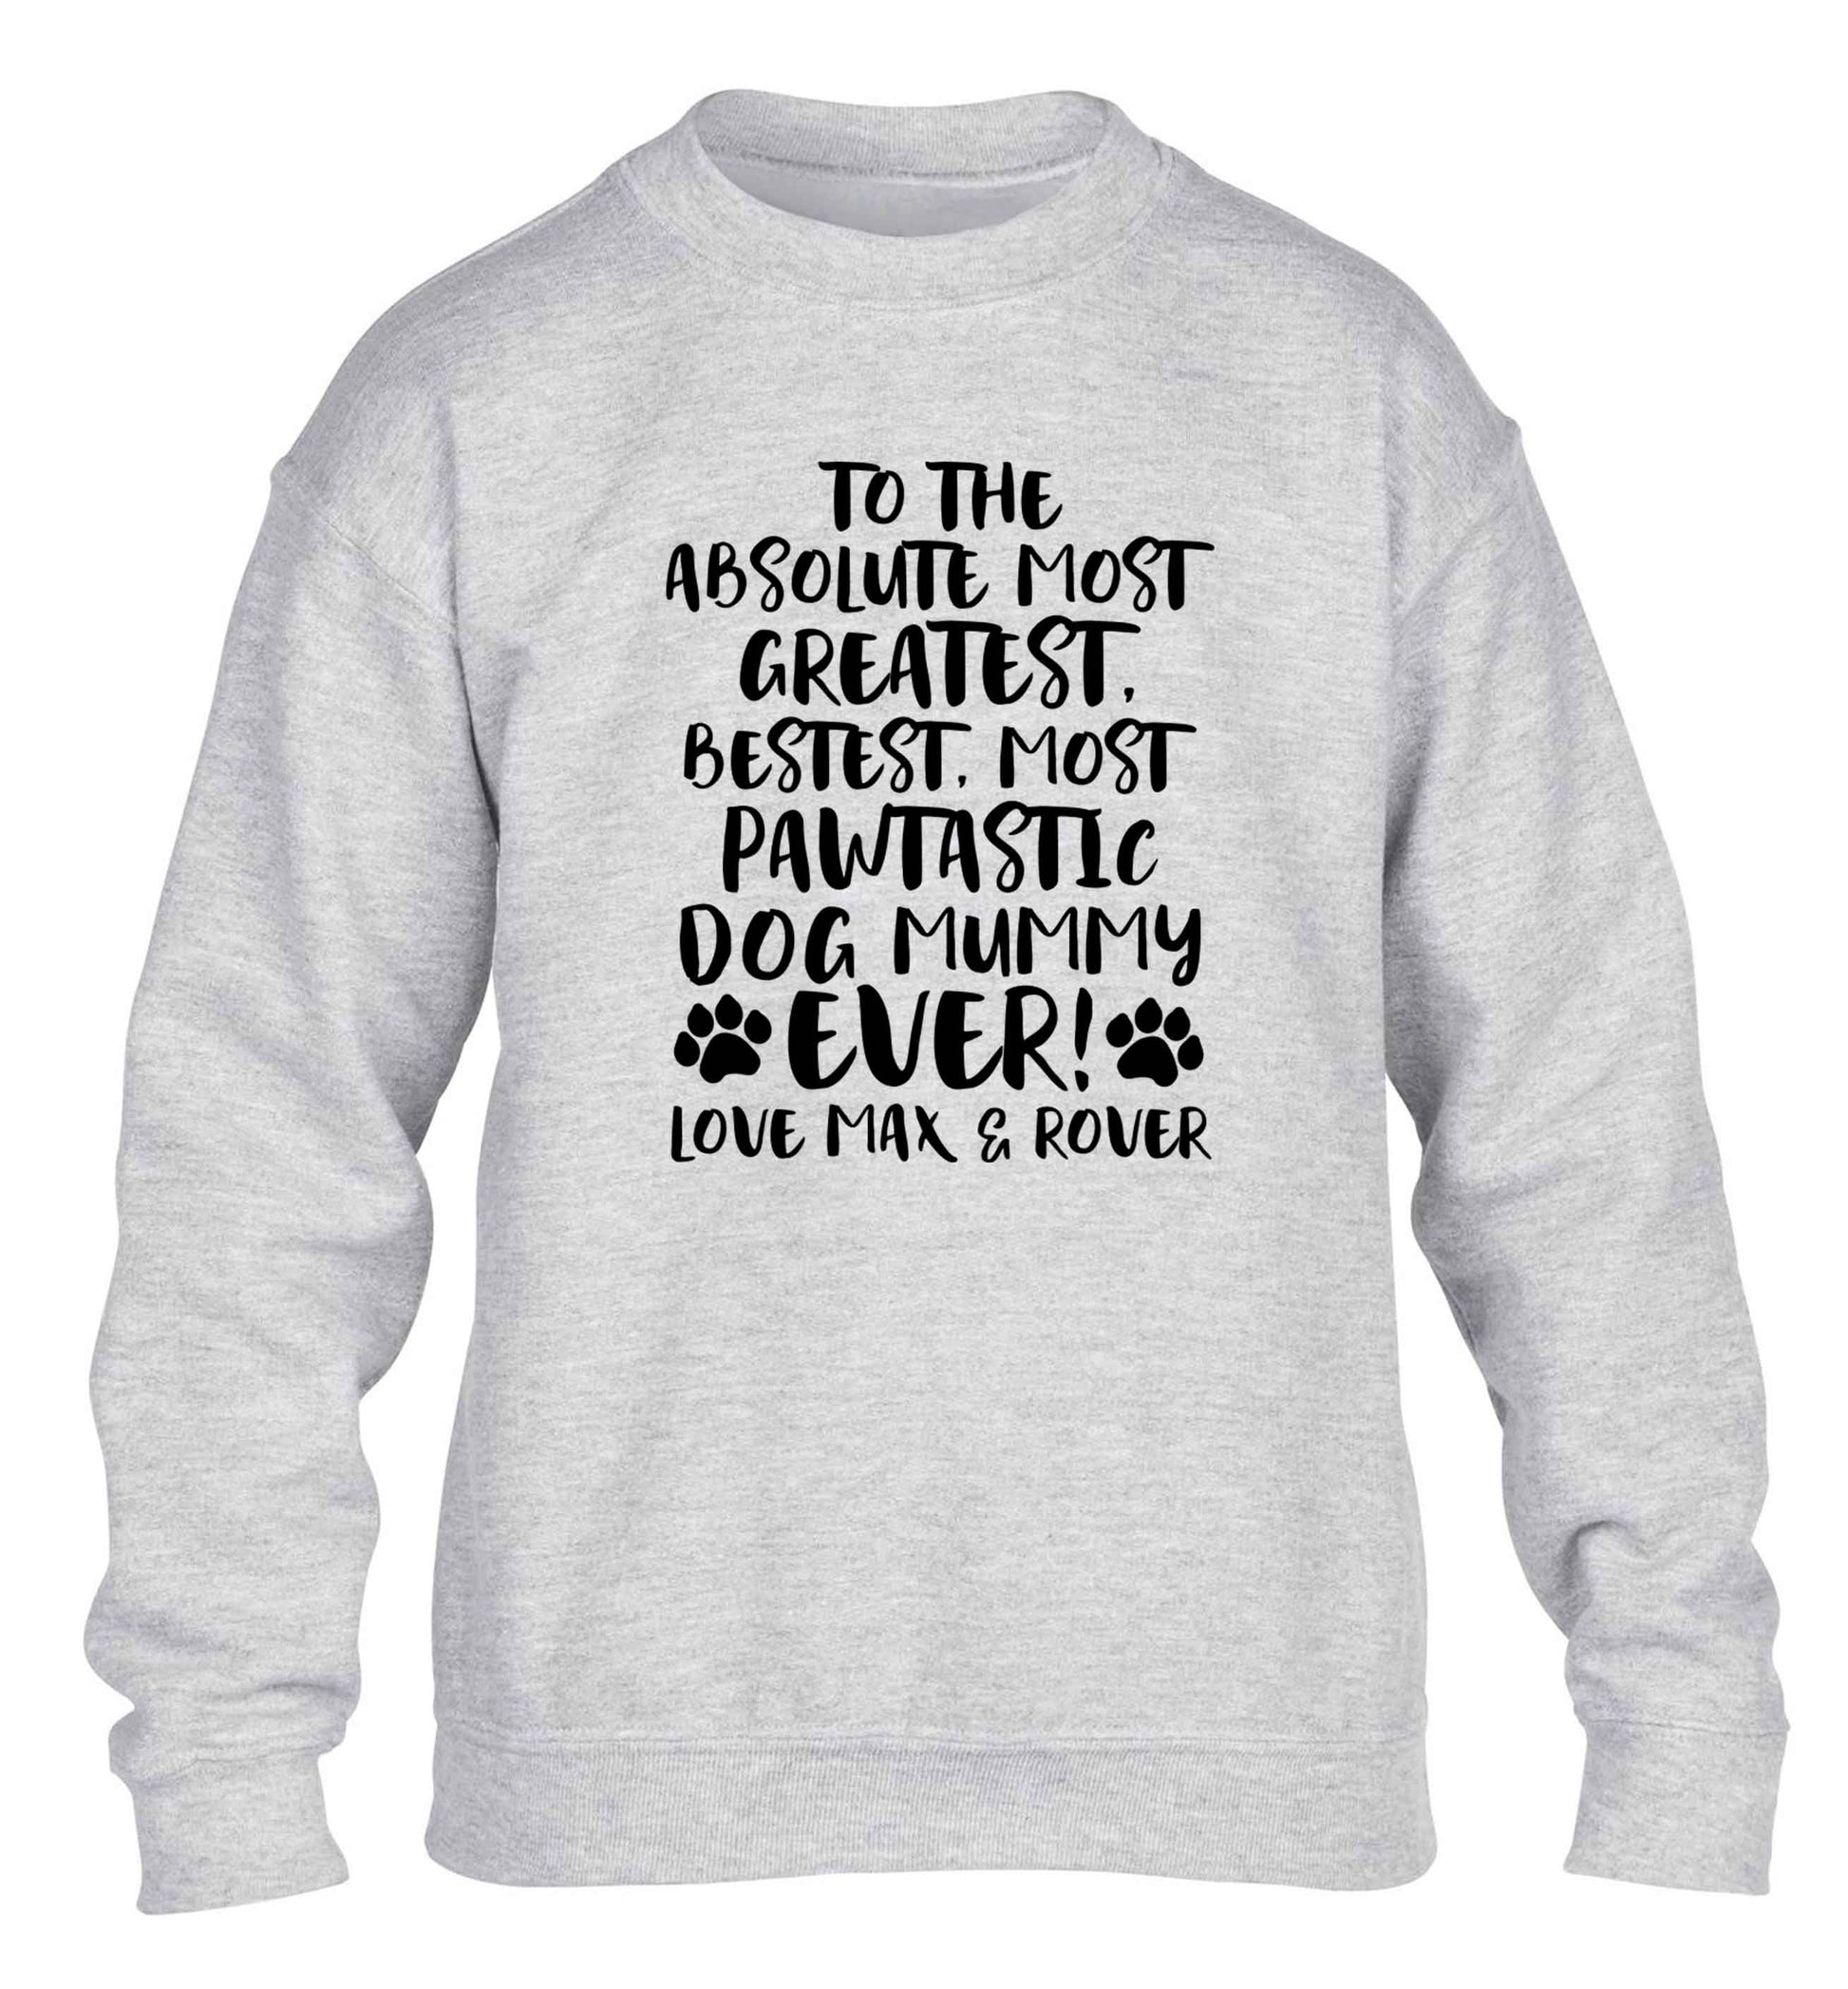 Personalsied to the most pawtastic dog mummy ever children's grey sweater 12-13 Years